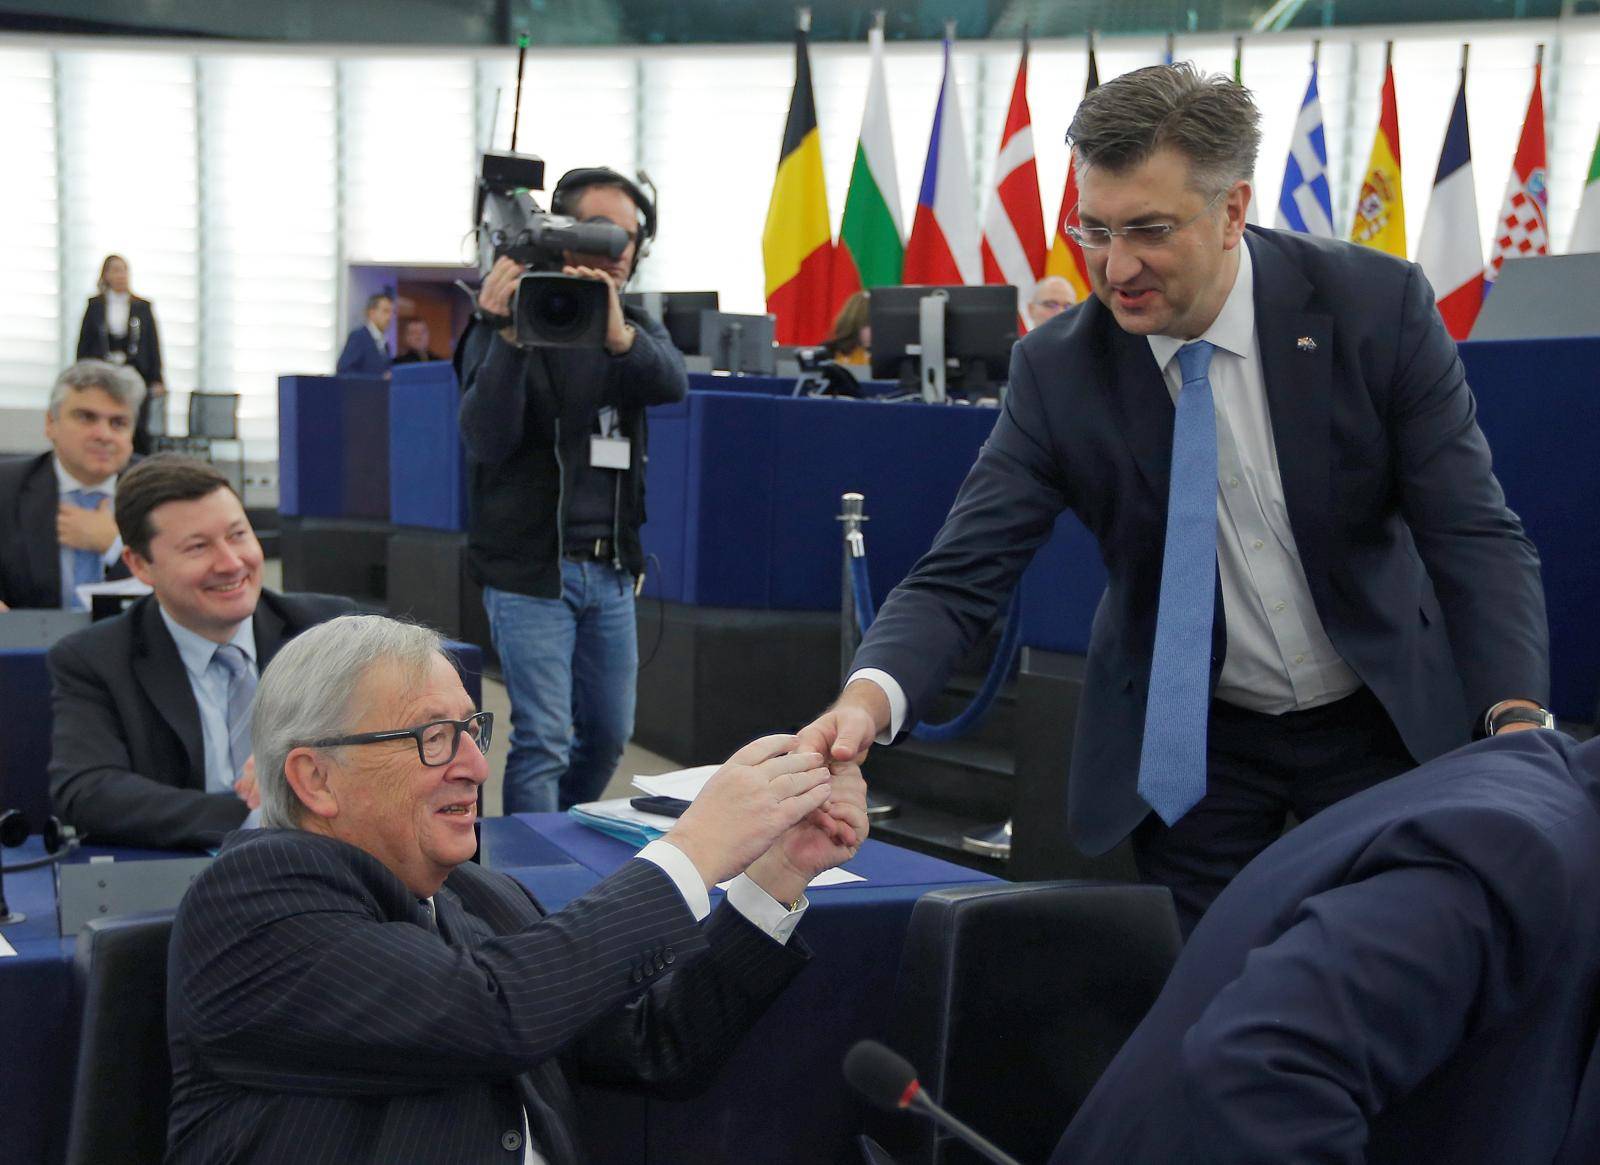 Croatia's Prime Minister Plenkovic shakes hands with European Commission President Juncker as he arrives to deliver a speech during a debate on the Future of Europe at the European Parliament in Strasbourg